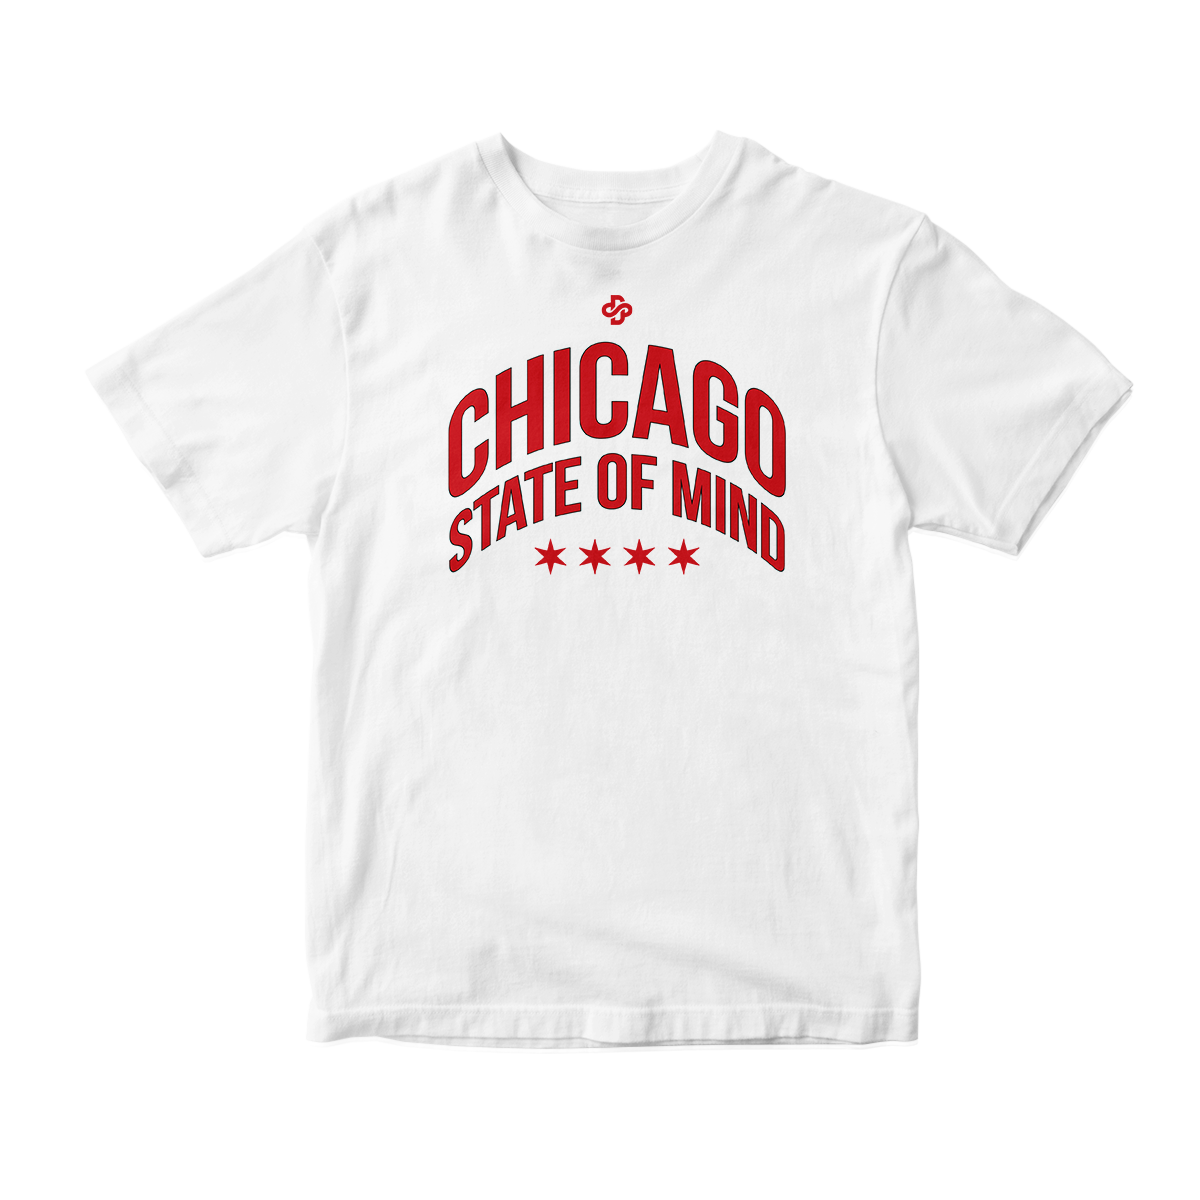 'Chicago State of Mind' in Gym Red CW Unisex Short Sleeve Tee